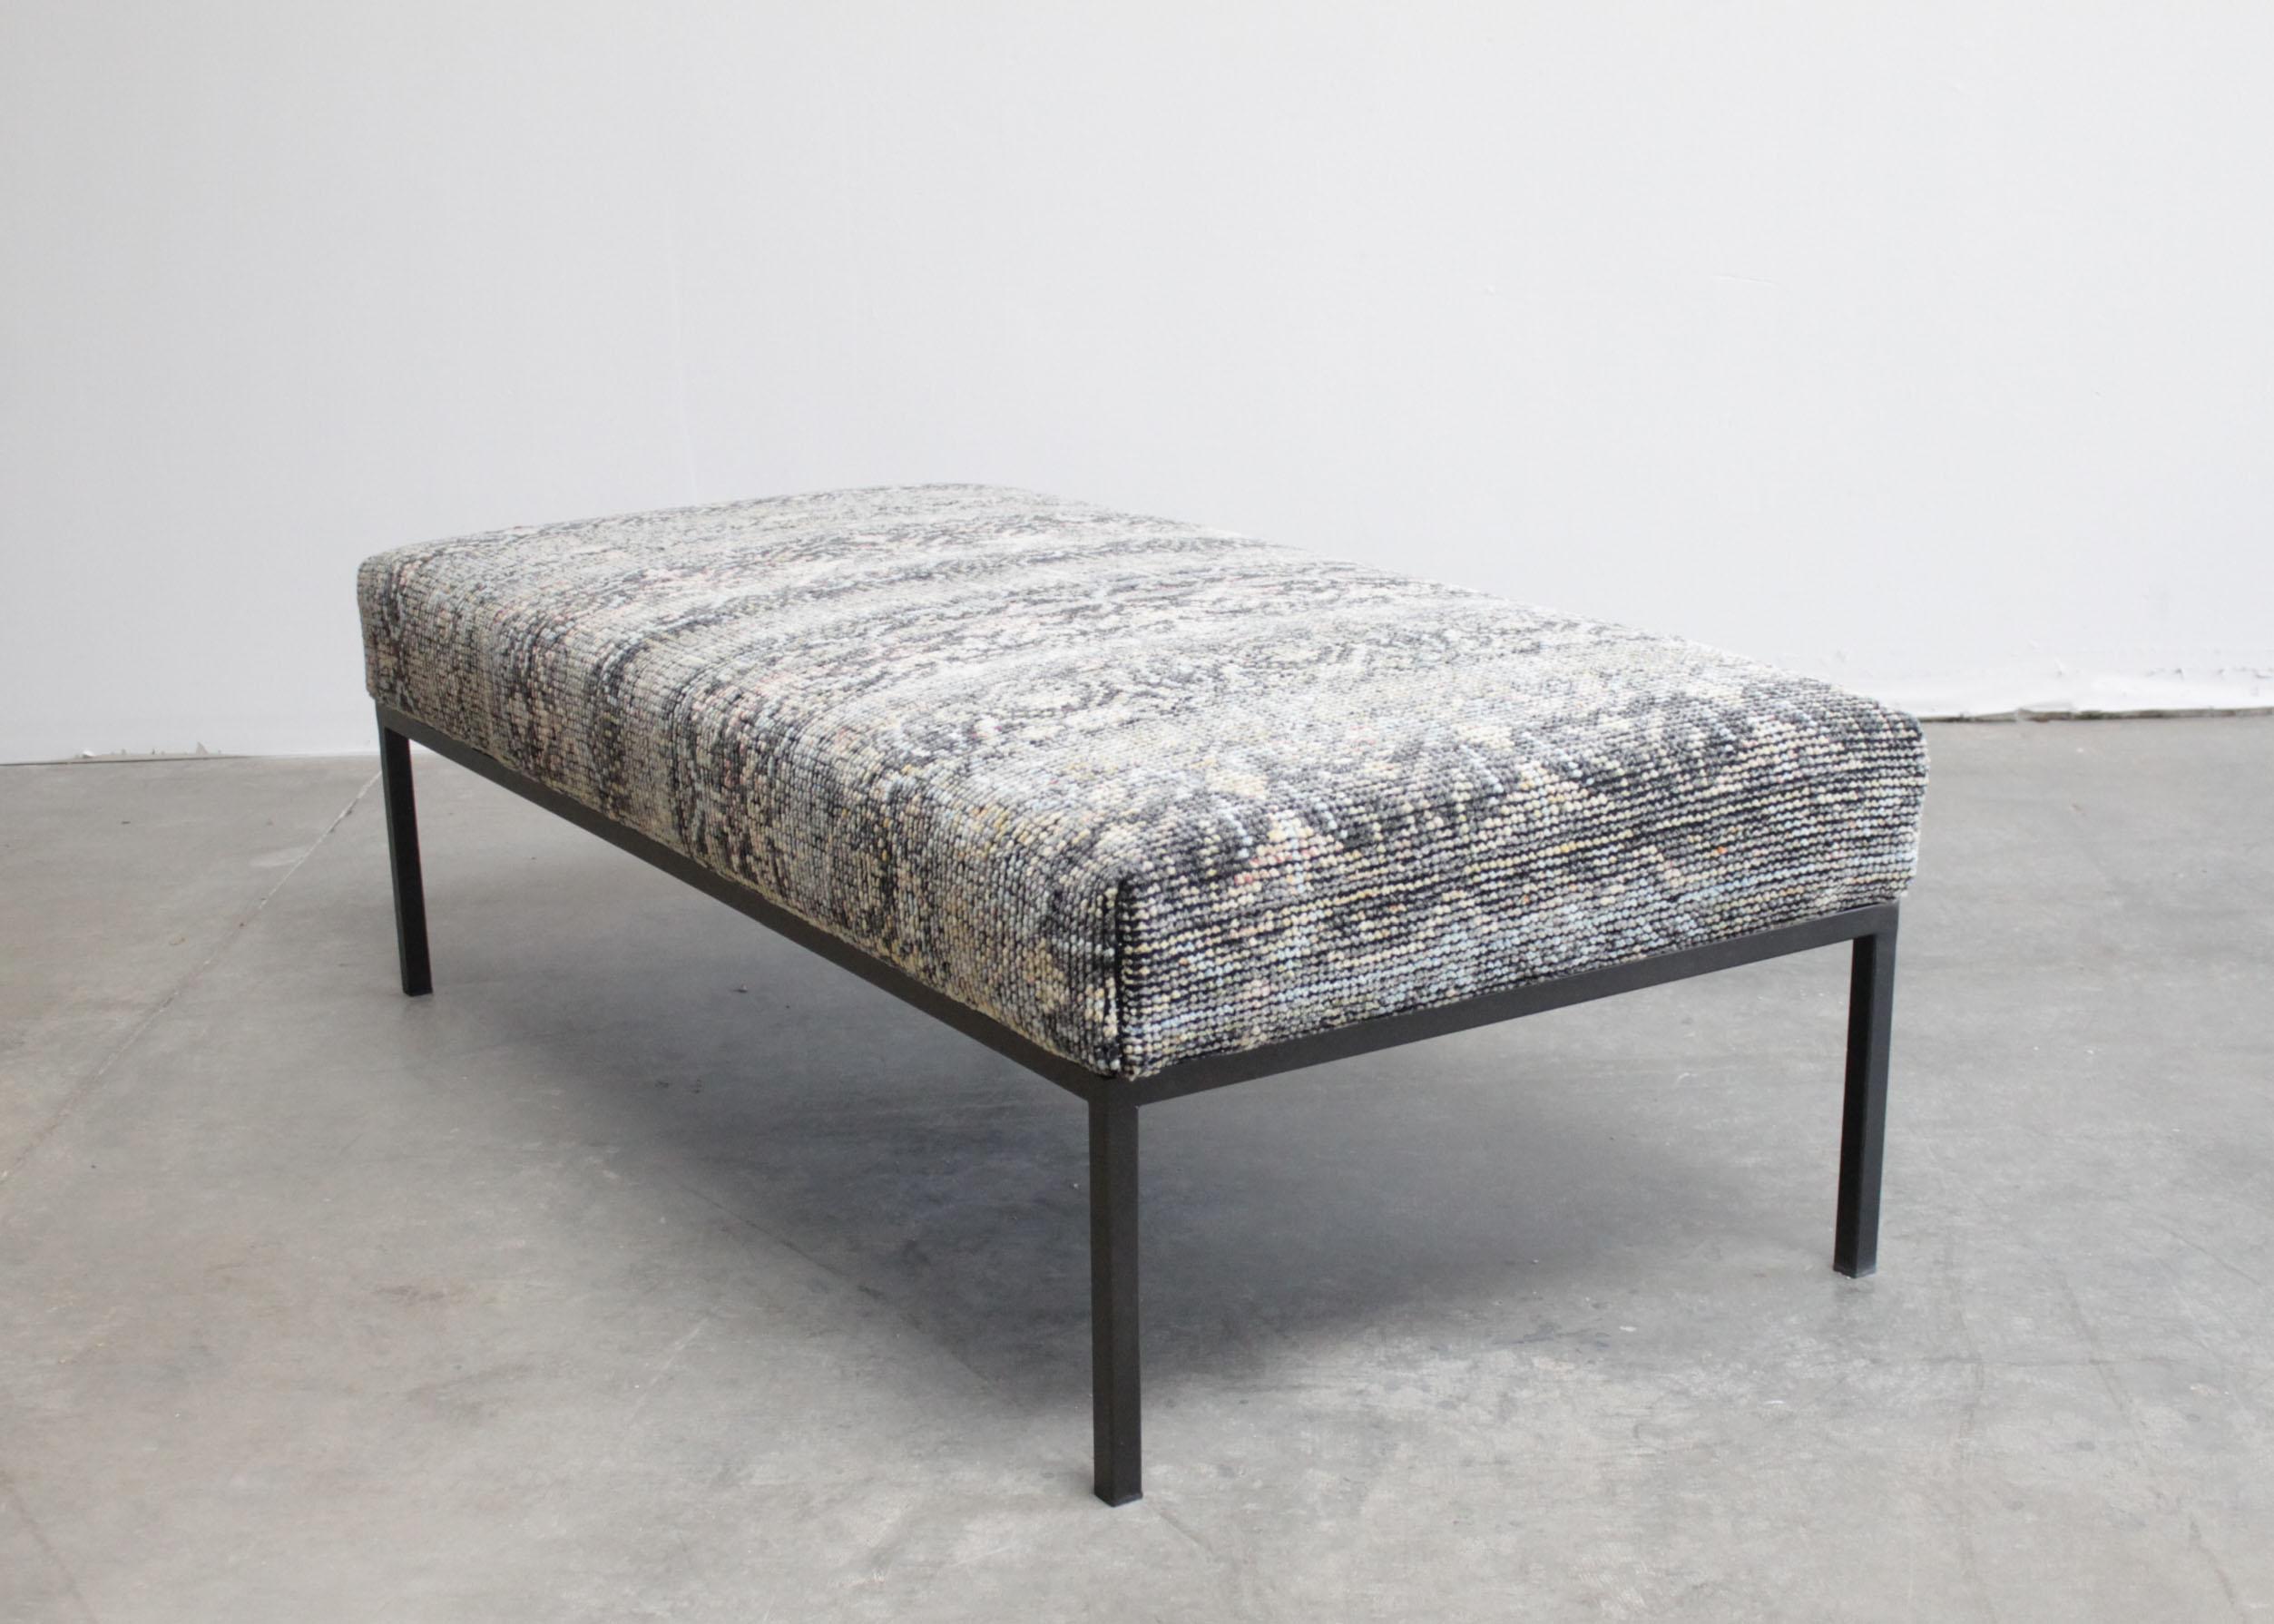 Custom made iron upholstered cocktail table bench ottoman.
The base is a custom finished iron base, with a vintage style rug upholstered top. The very durable top is a heavy weaved wool. Dark grey, light grey, tan, indigo, blue, faded reds, and off